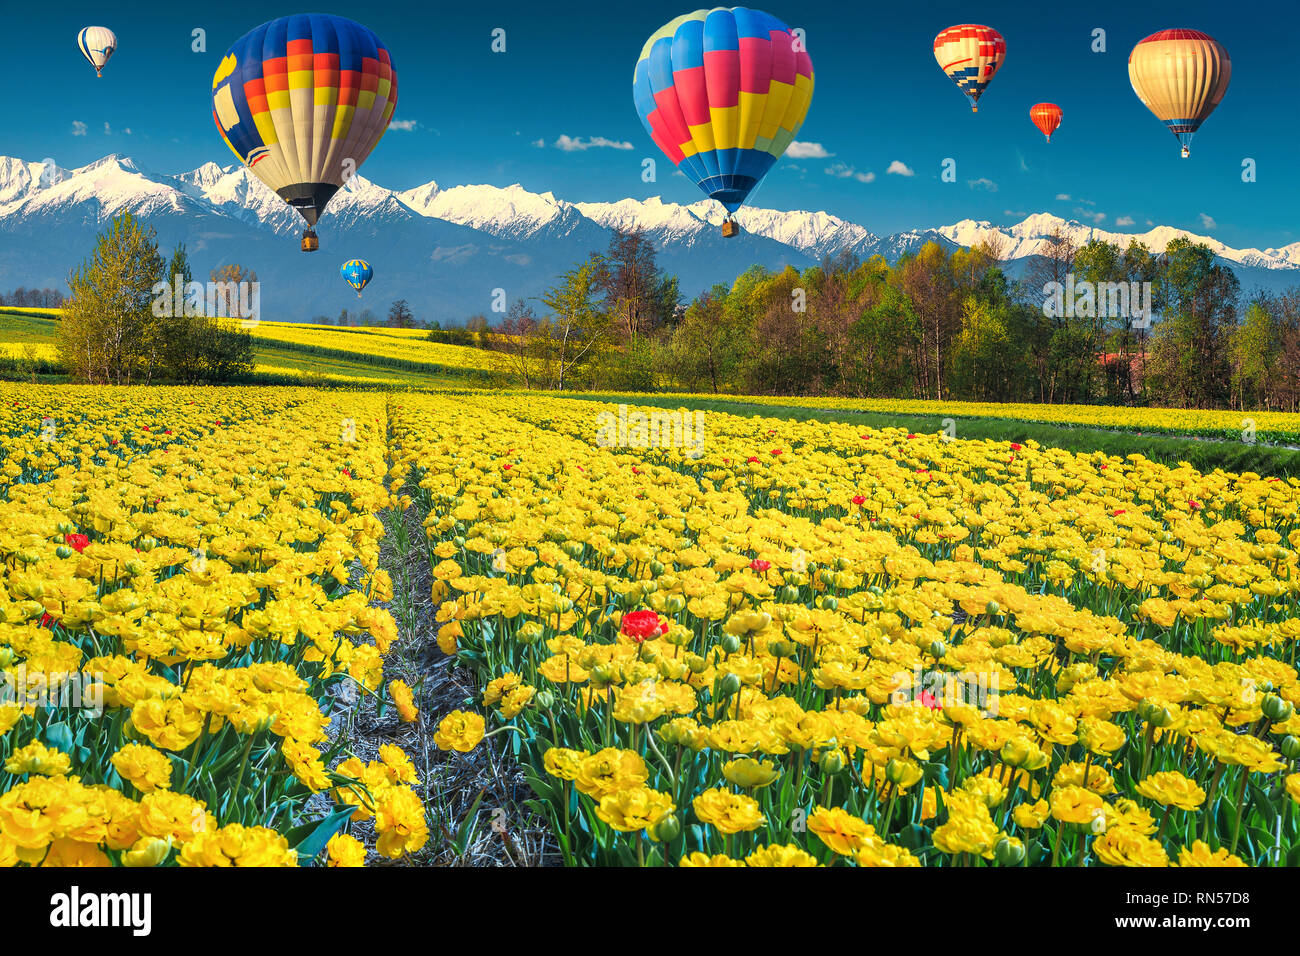 Stunning nature landscape and travel concept. Amazing yellow tulip fields and high snowy mountains in background with colorful hot air balloons, Trans Stock Photo